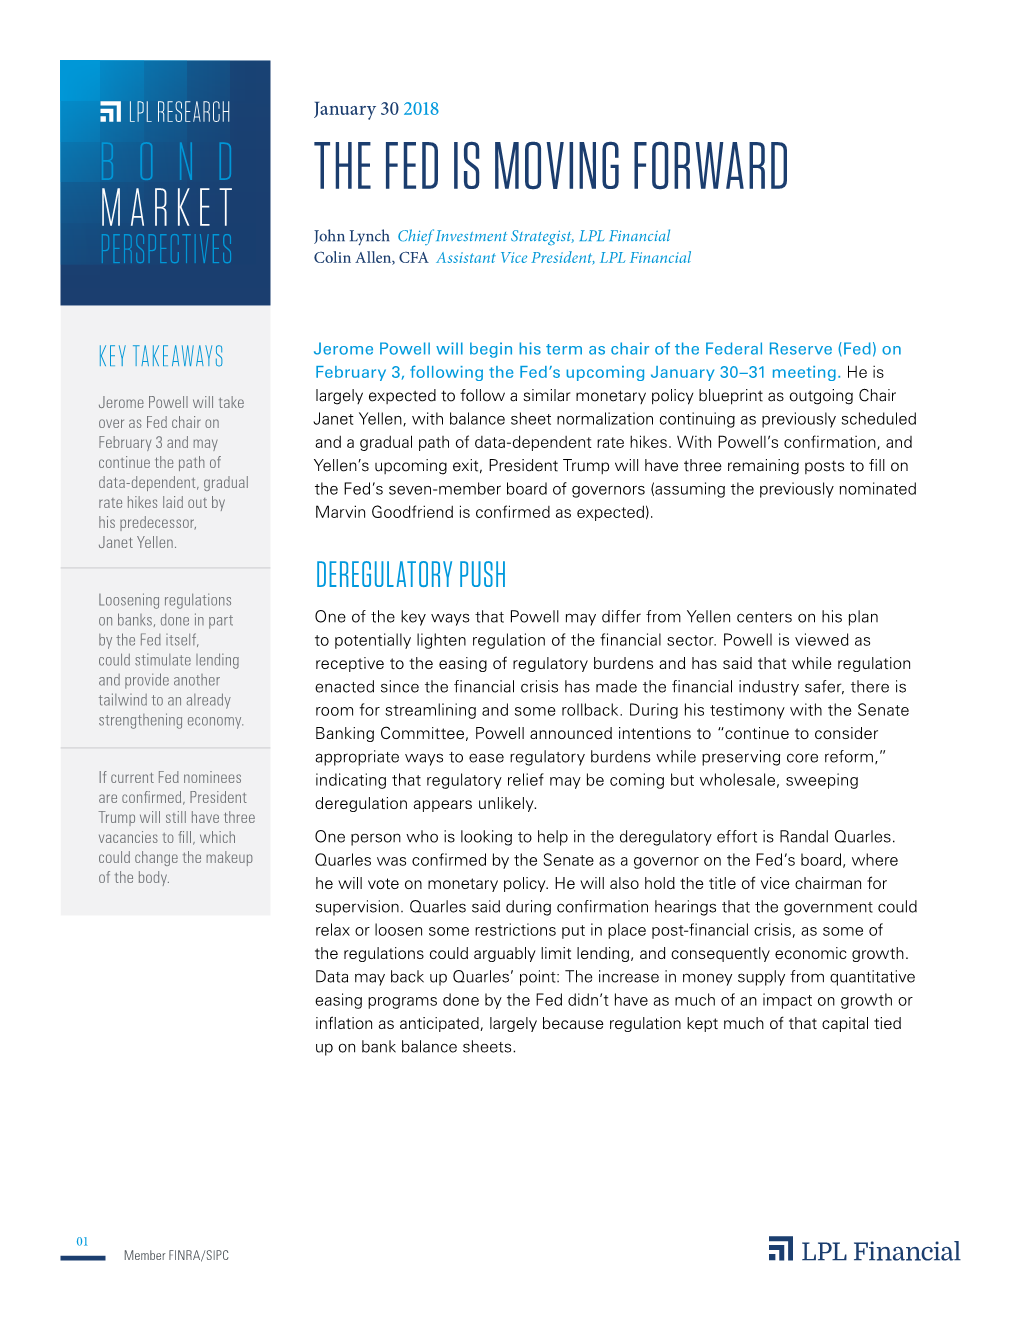 Bond Market Perspectives – the Fed Is Moving Forward